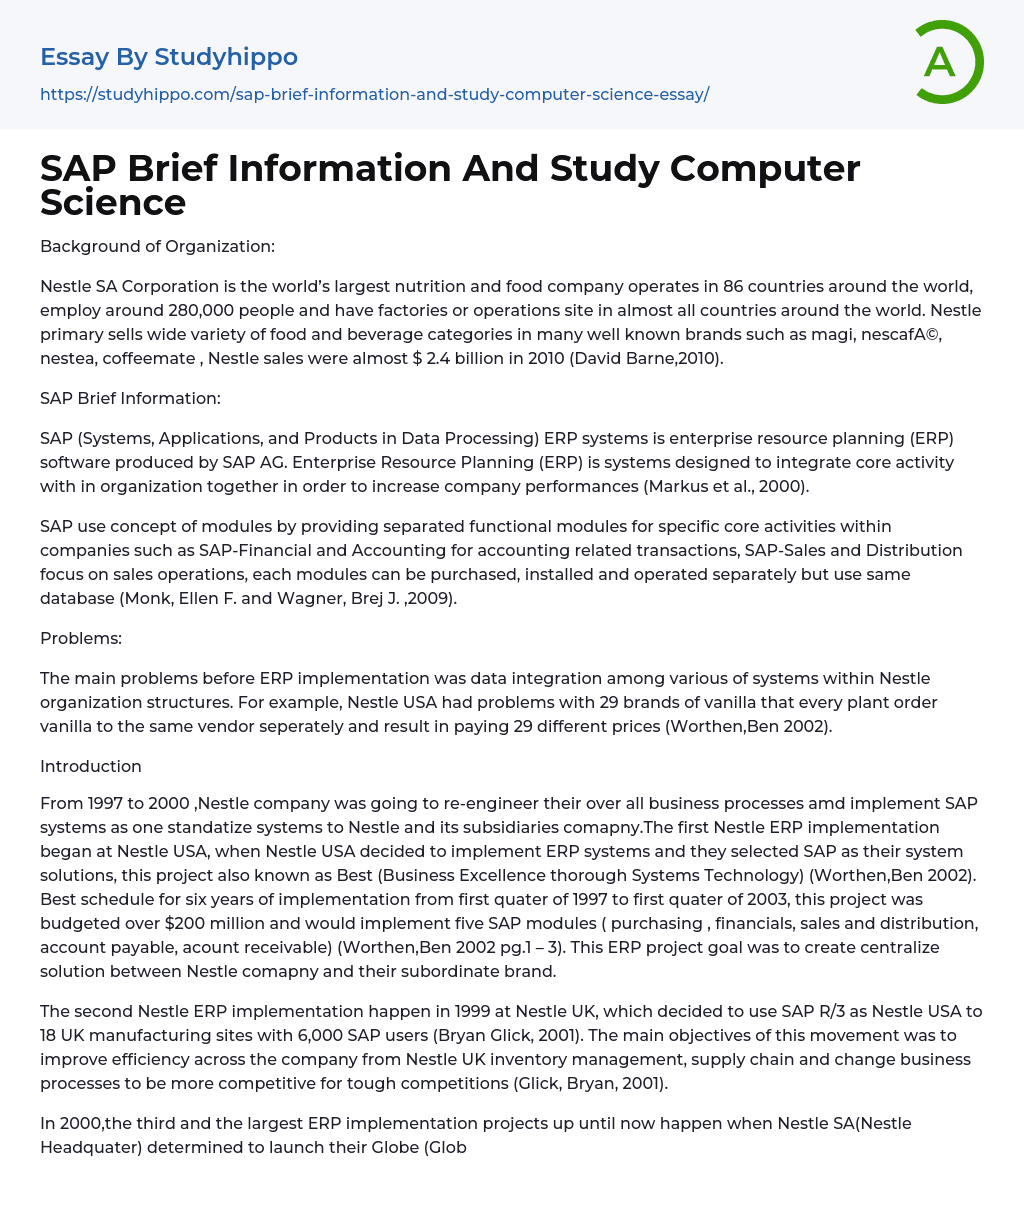 SAP Brief Information And Study Computer Science Essay Example